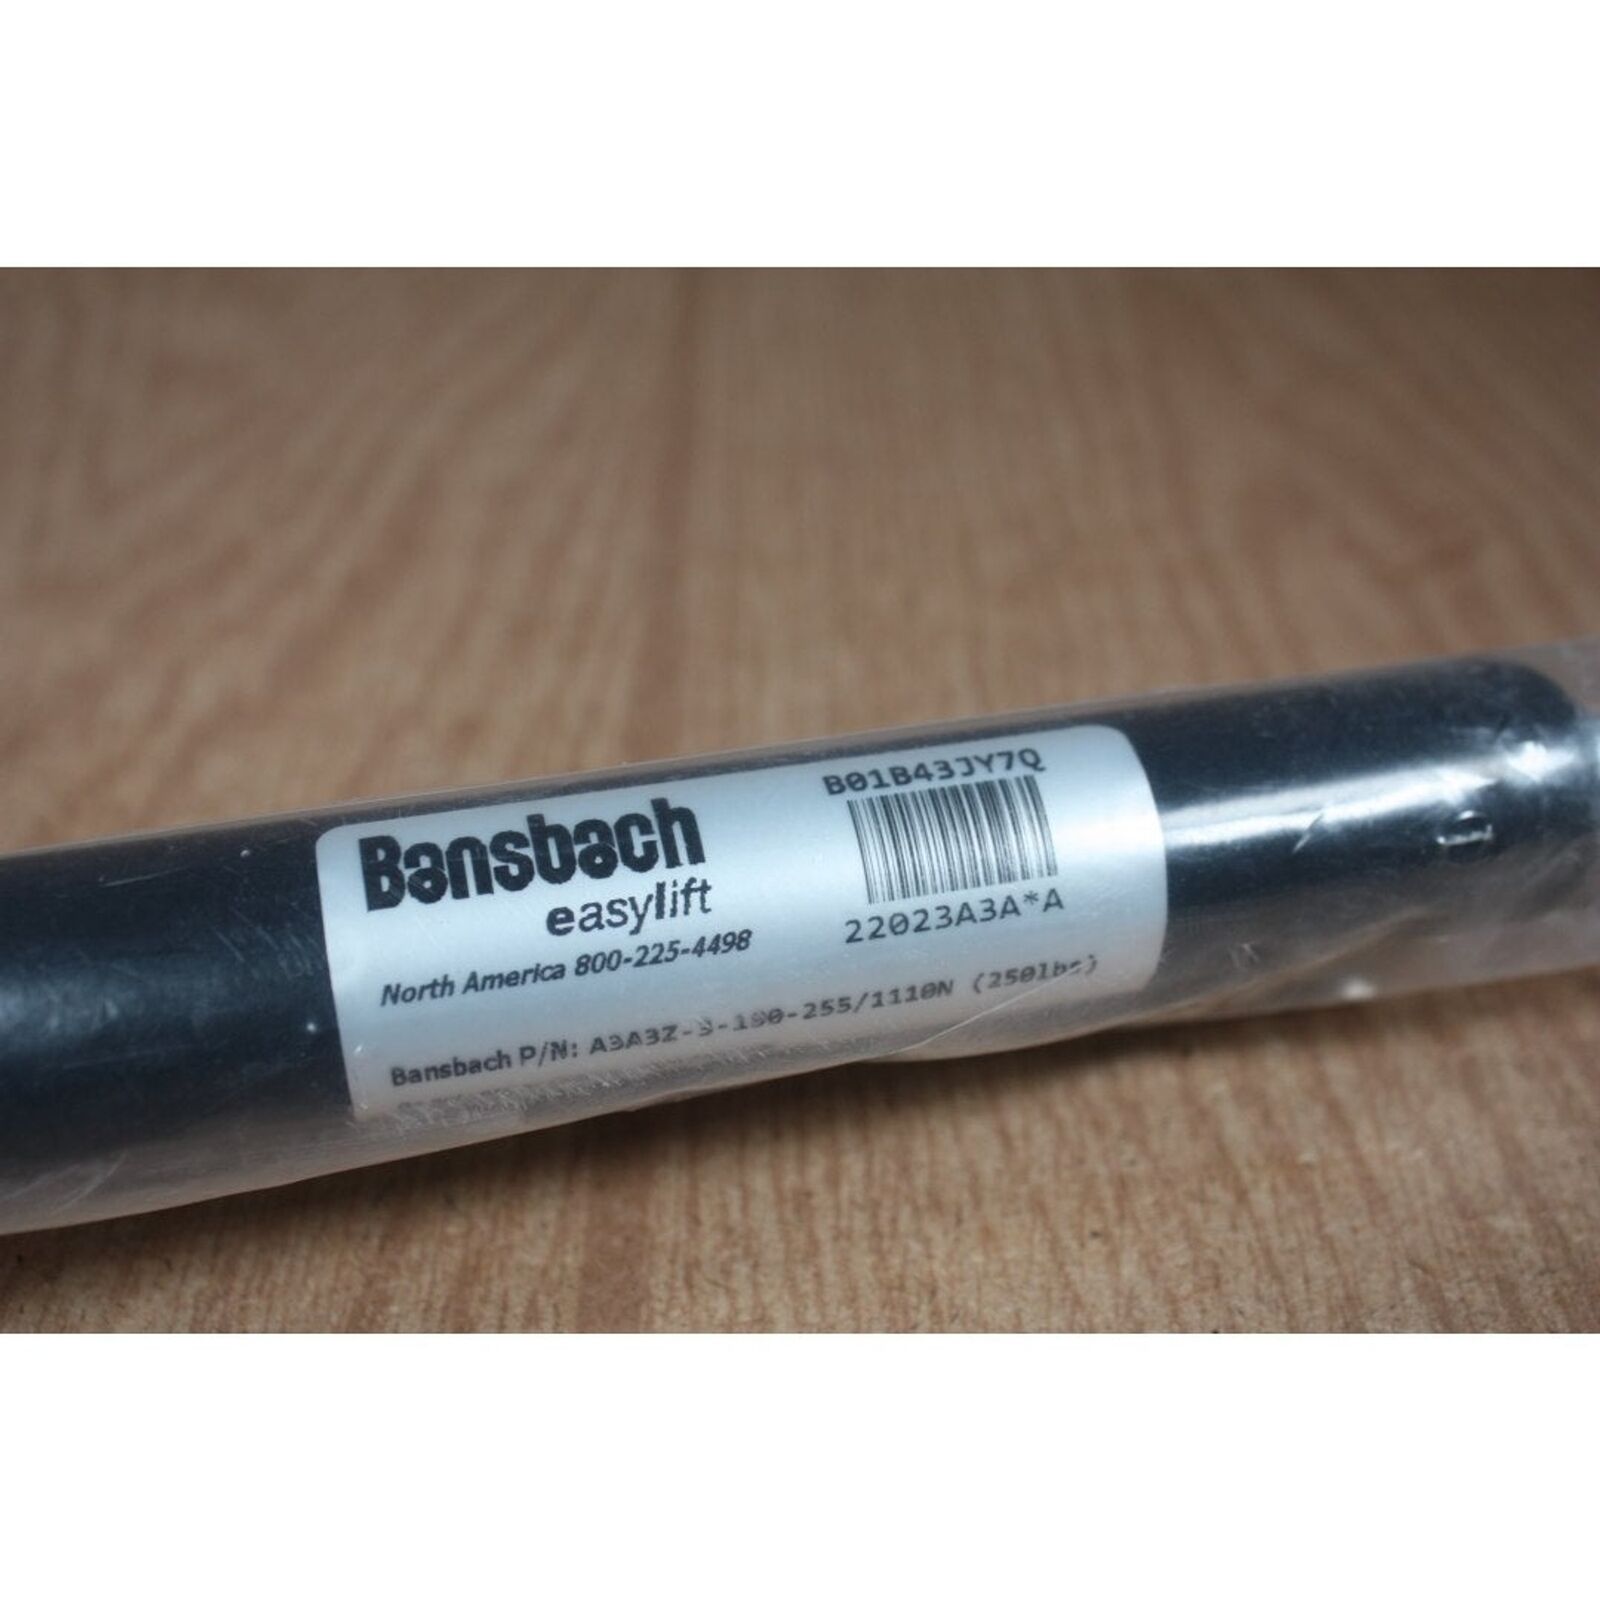 Bansbach Easylift A3A3Z3-050-205-1110N Traction Gas Spring Stroke Force (250lbs)